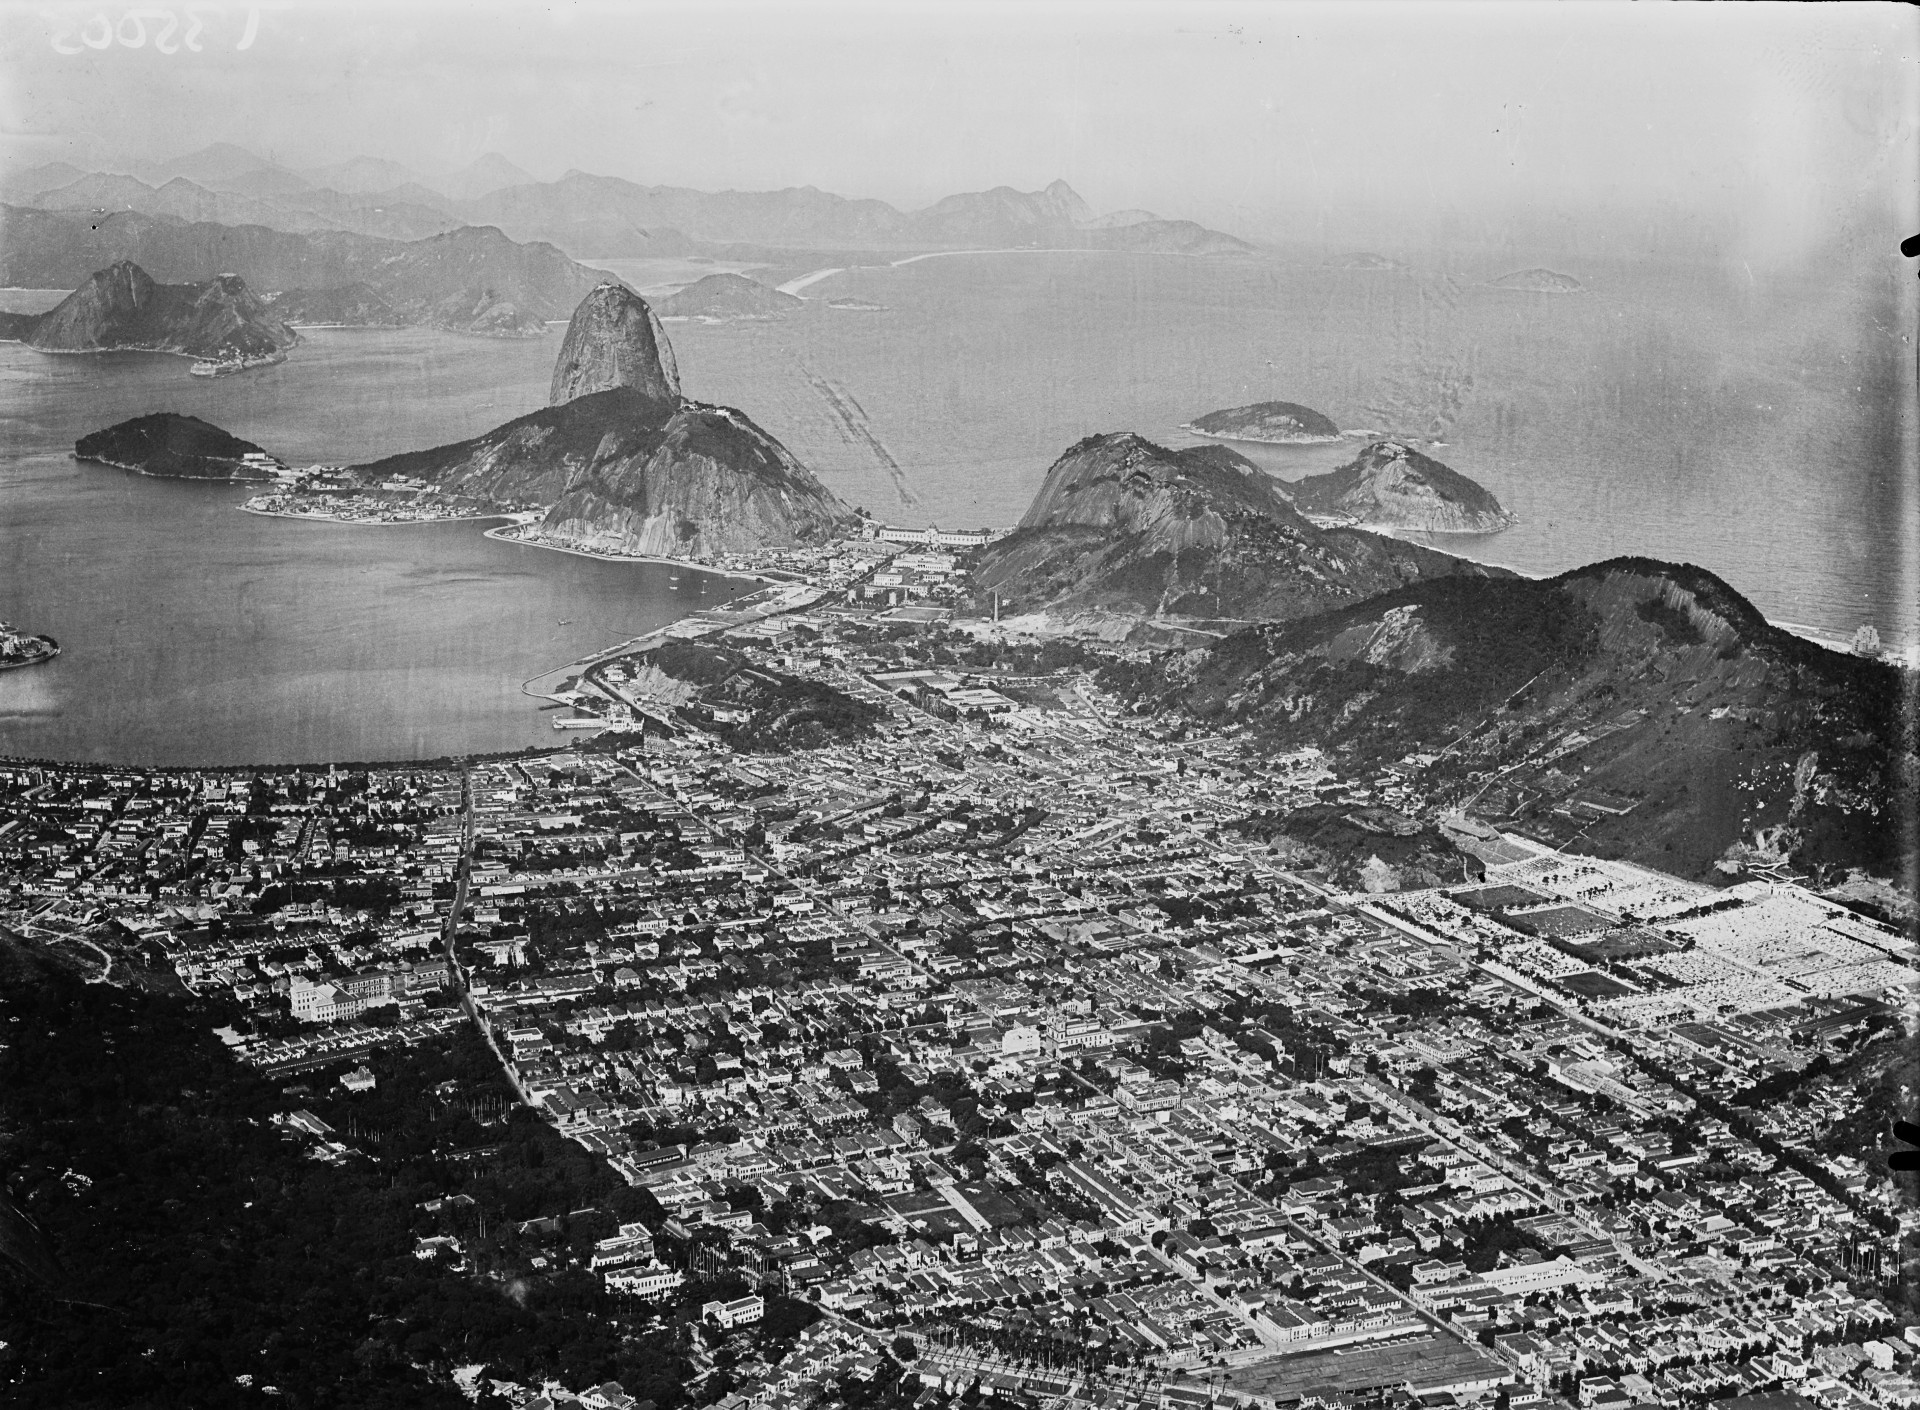 This is how the Brazilian city looked like in 1930.<p><a href="https://www.msn.com/en-us/community/channel/vid-7xx8mnucu55yw63we9va2gwr7uihbxwc68fxqp25x6tg4ftibpra?cvid=94631541bc0f4f89bfd59158d696ad7e">Follow us and access great exclusive content every day</a></p>